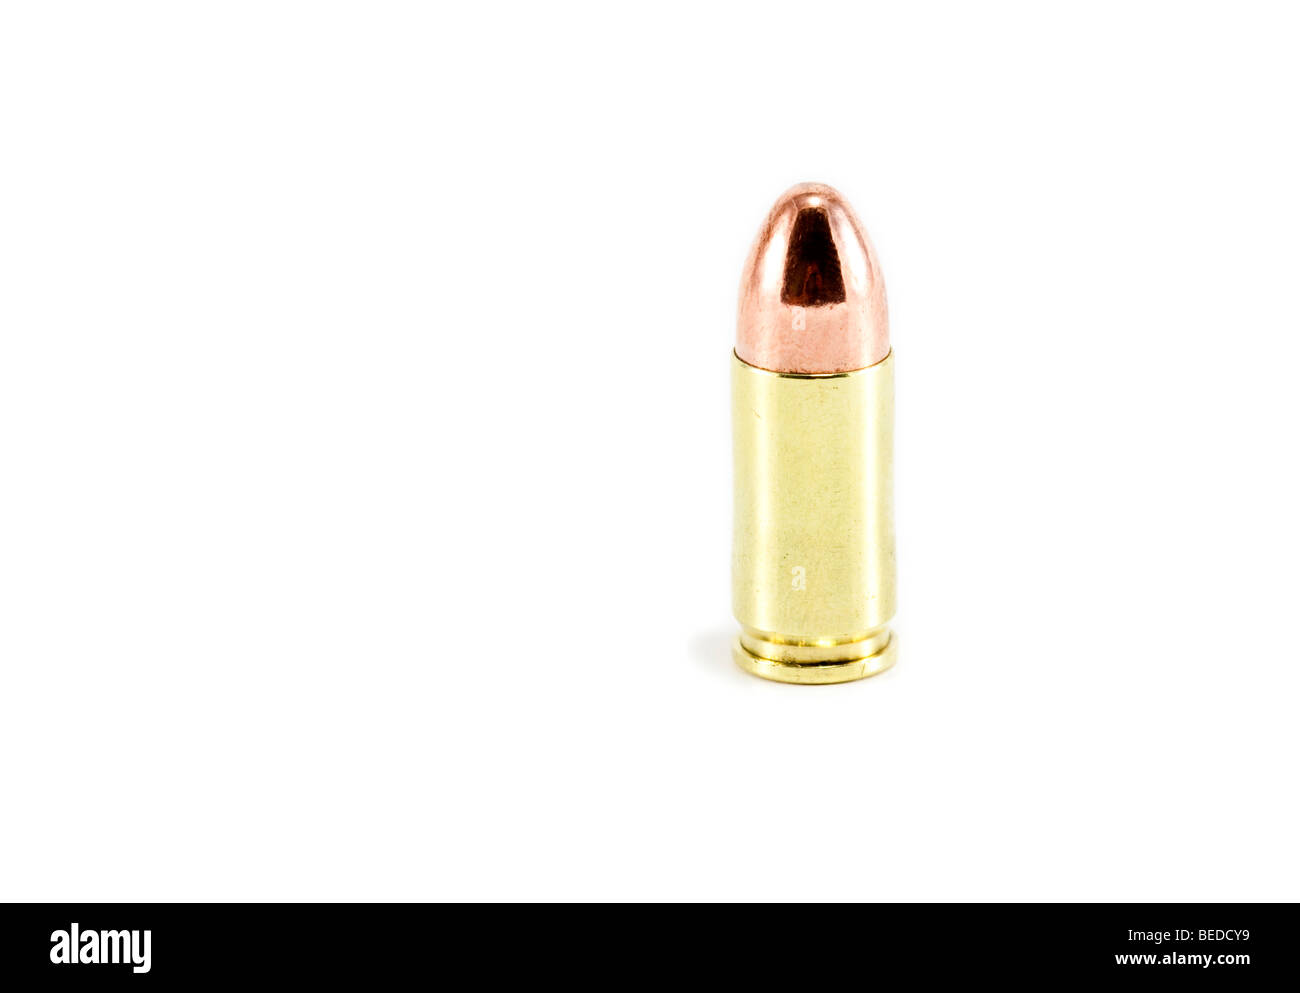 A single 9mm bullet isolated on white Stock Photo